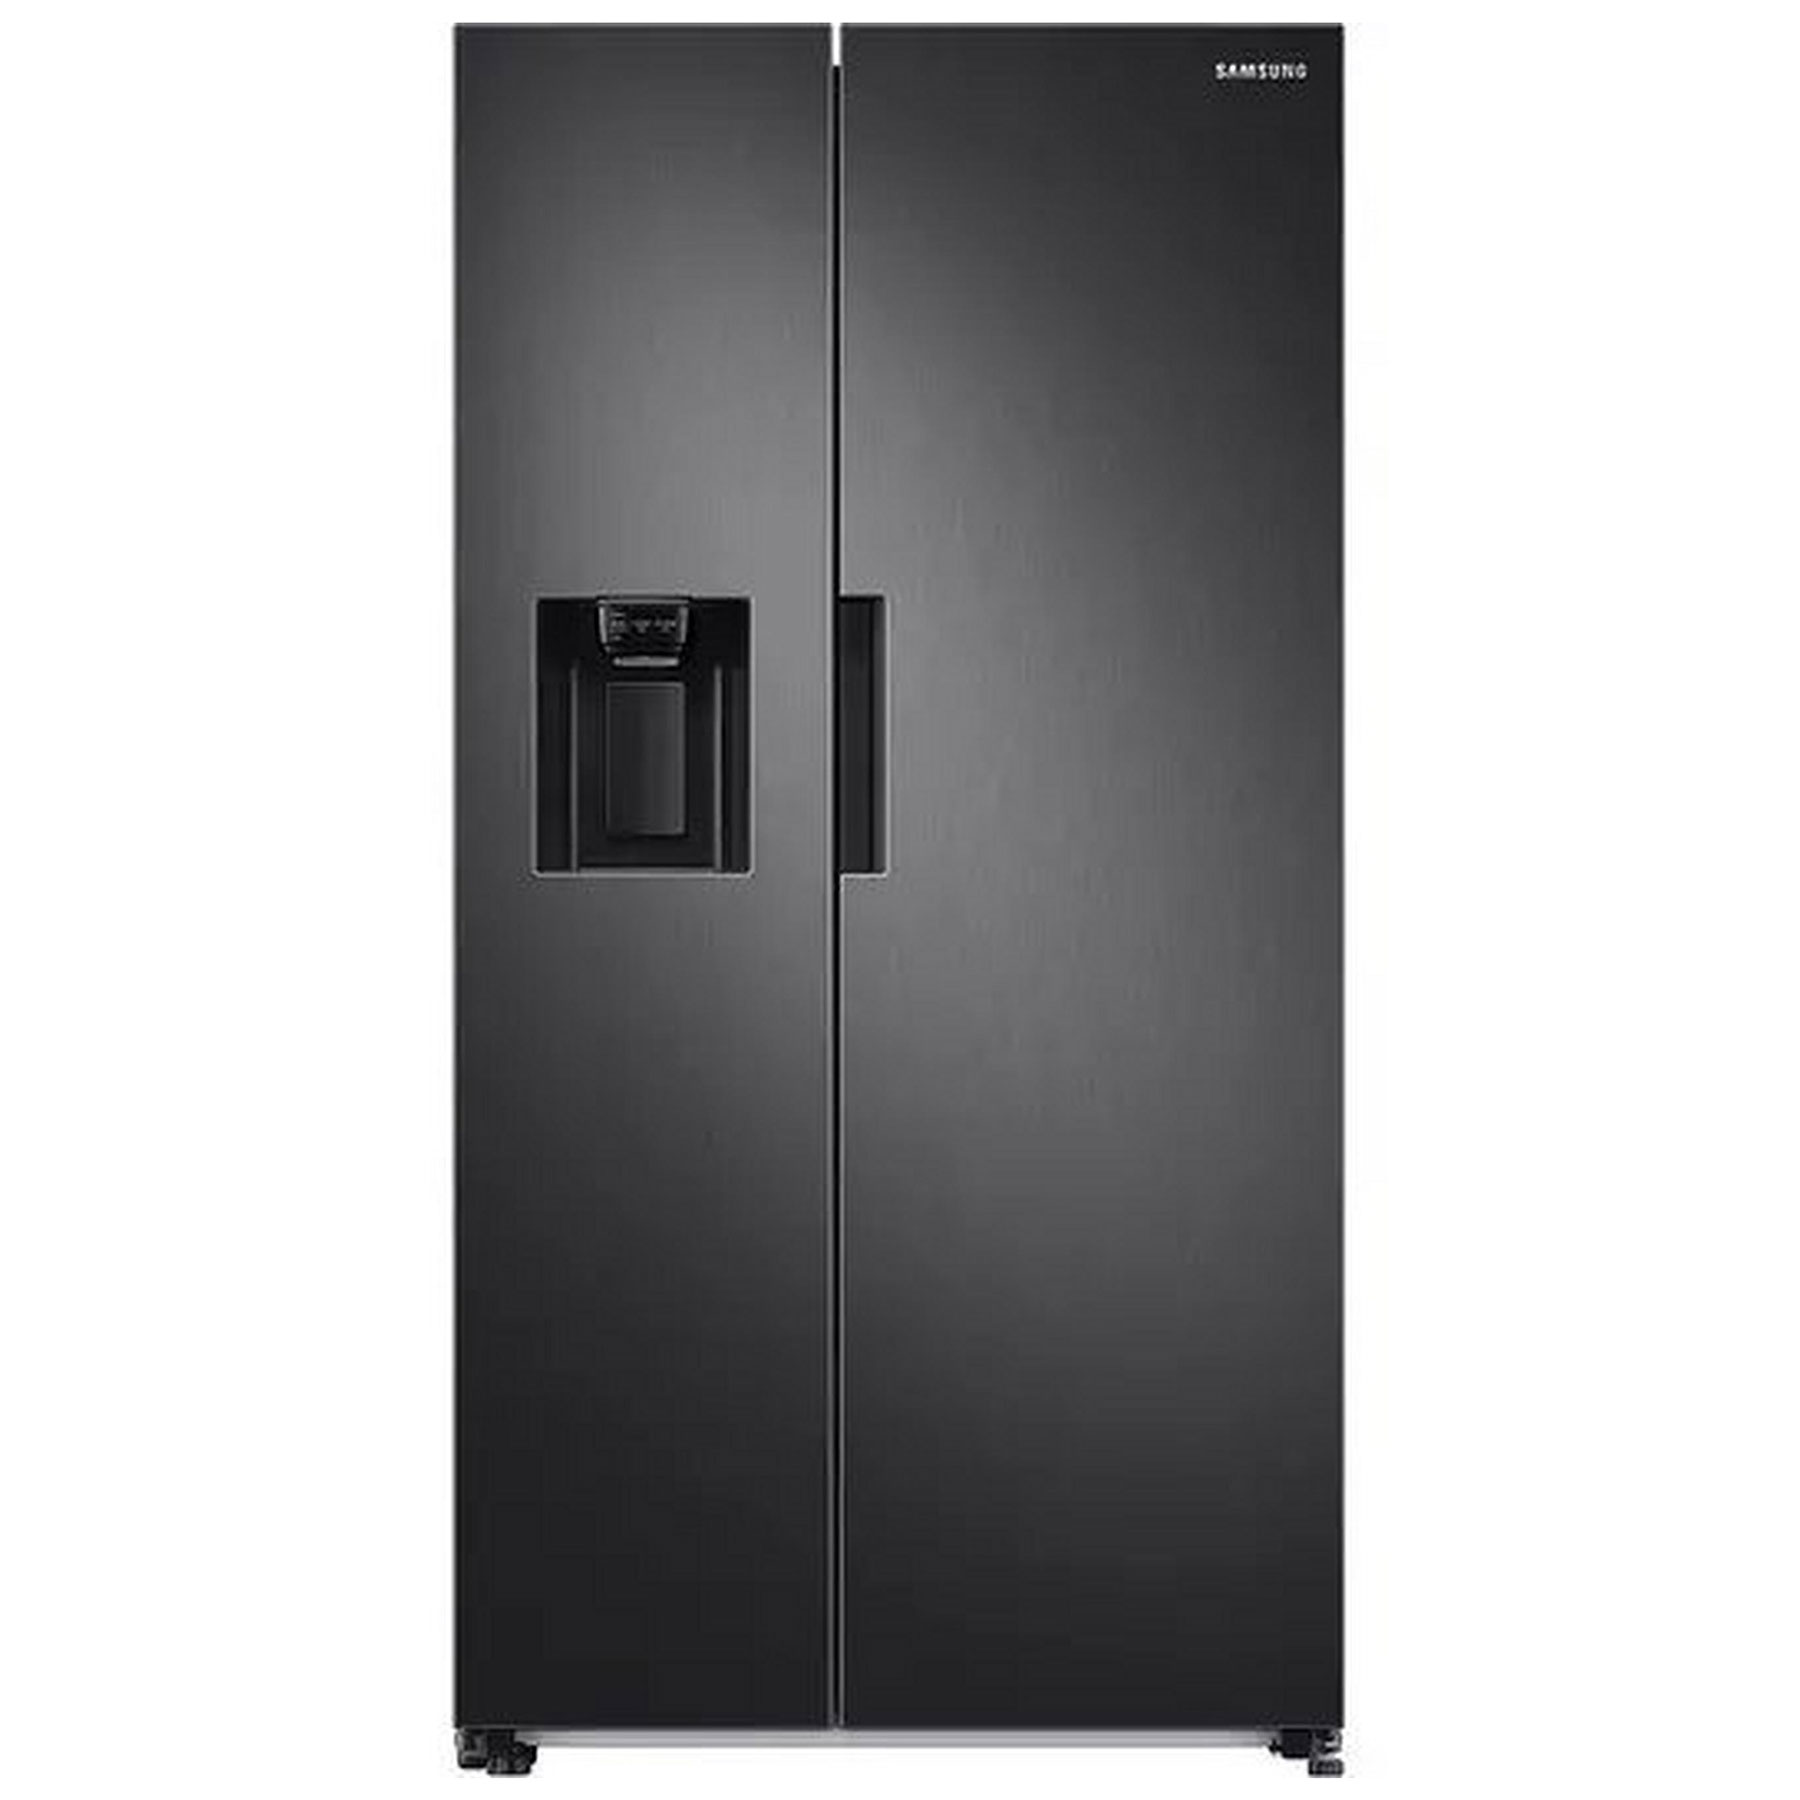 Image of Samsung RS67A8811B1 American Fridge Freezer in Black PL I W E Rated